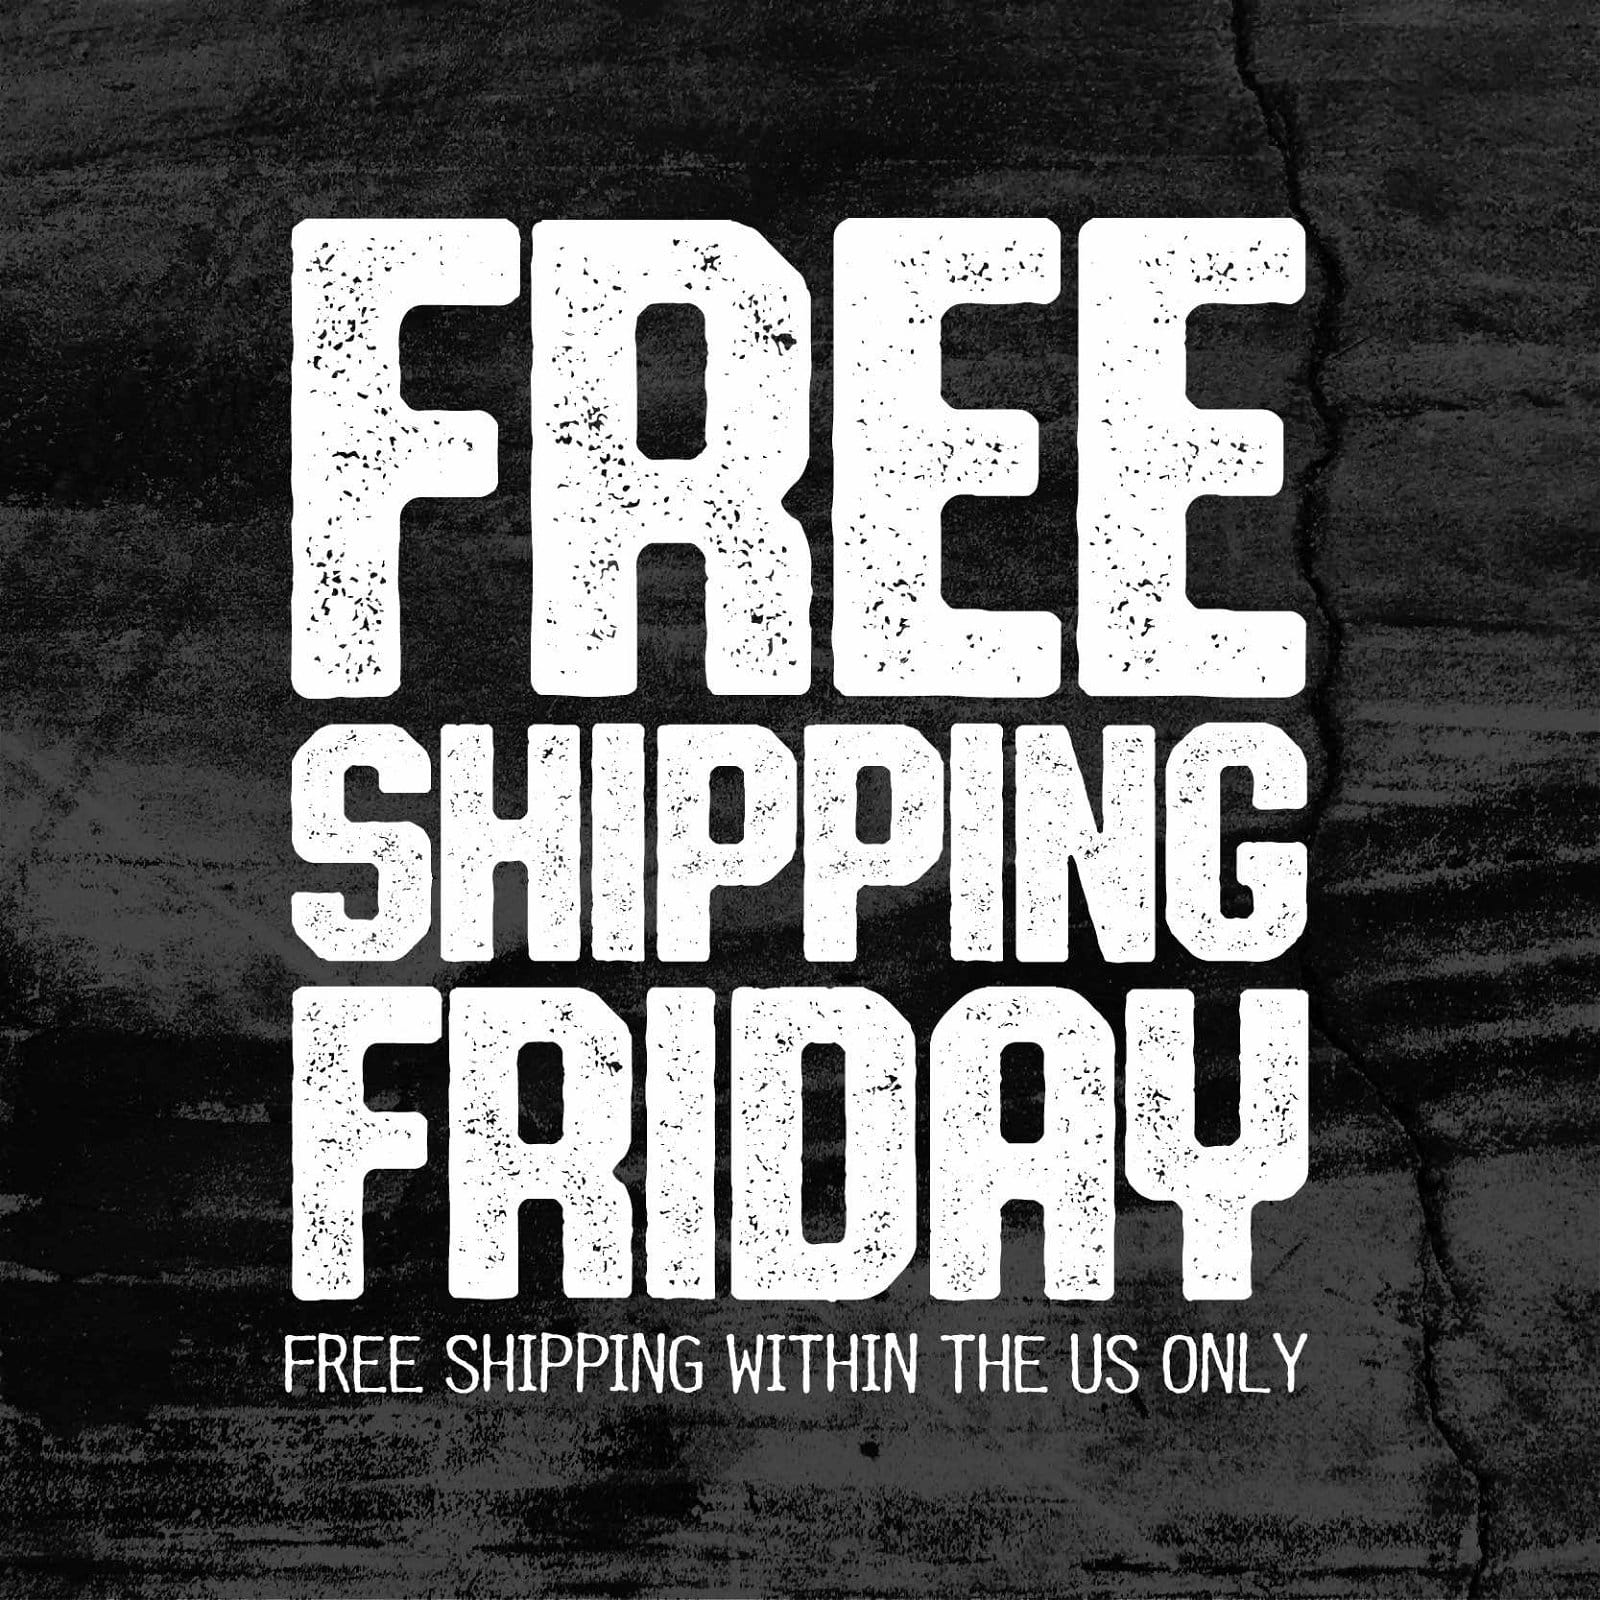 GET FREE SHIPPING TODAY ONLY